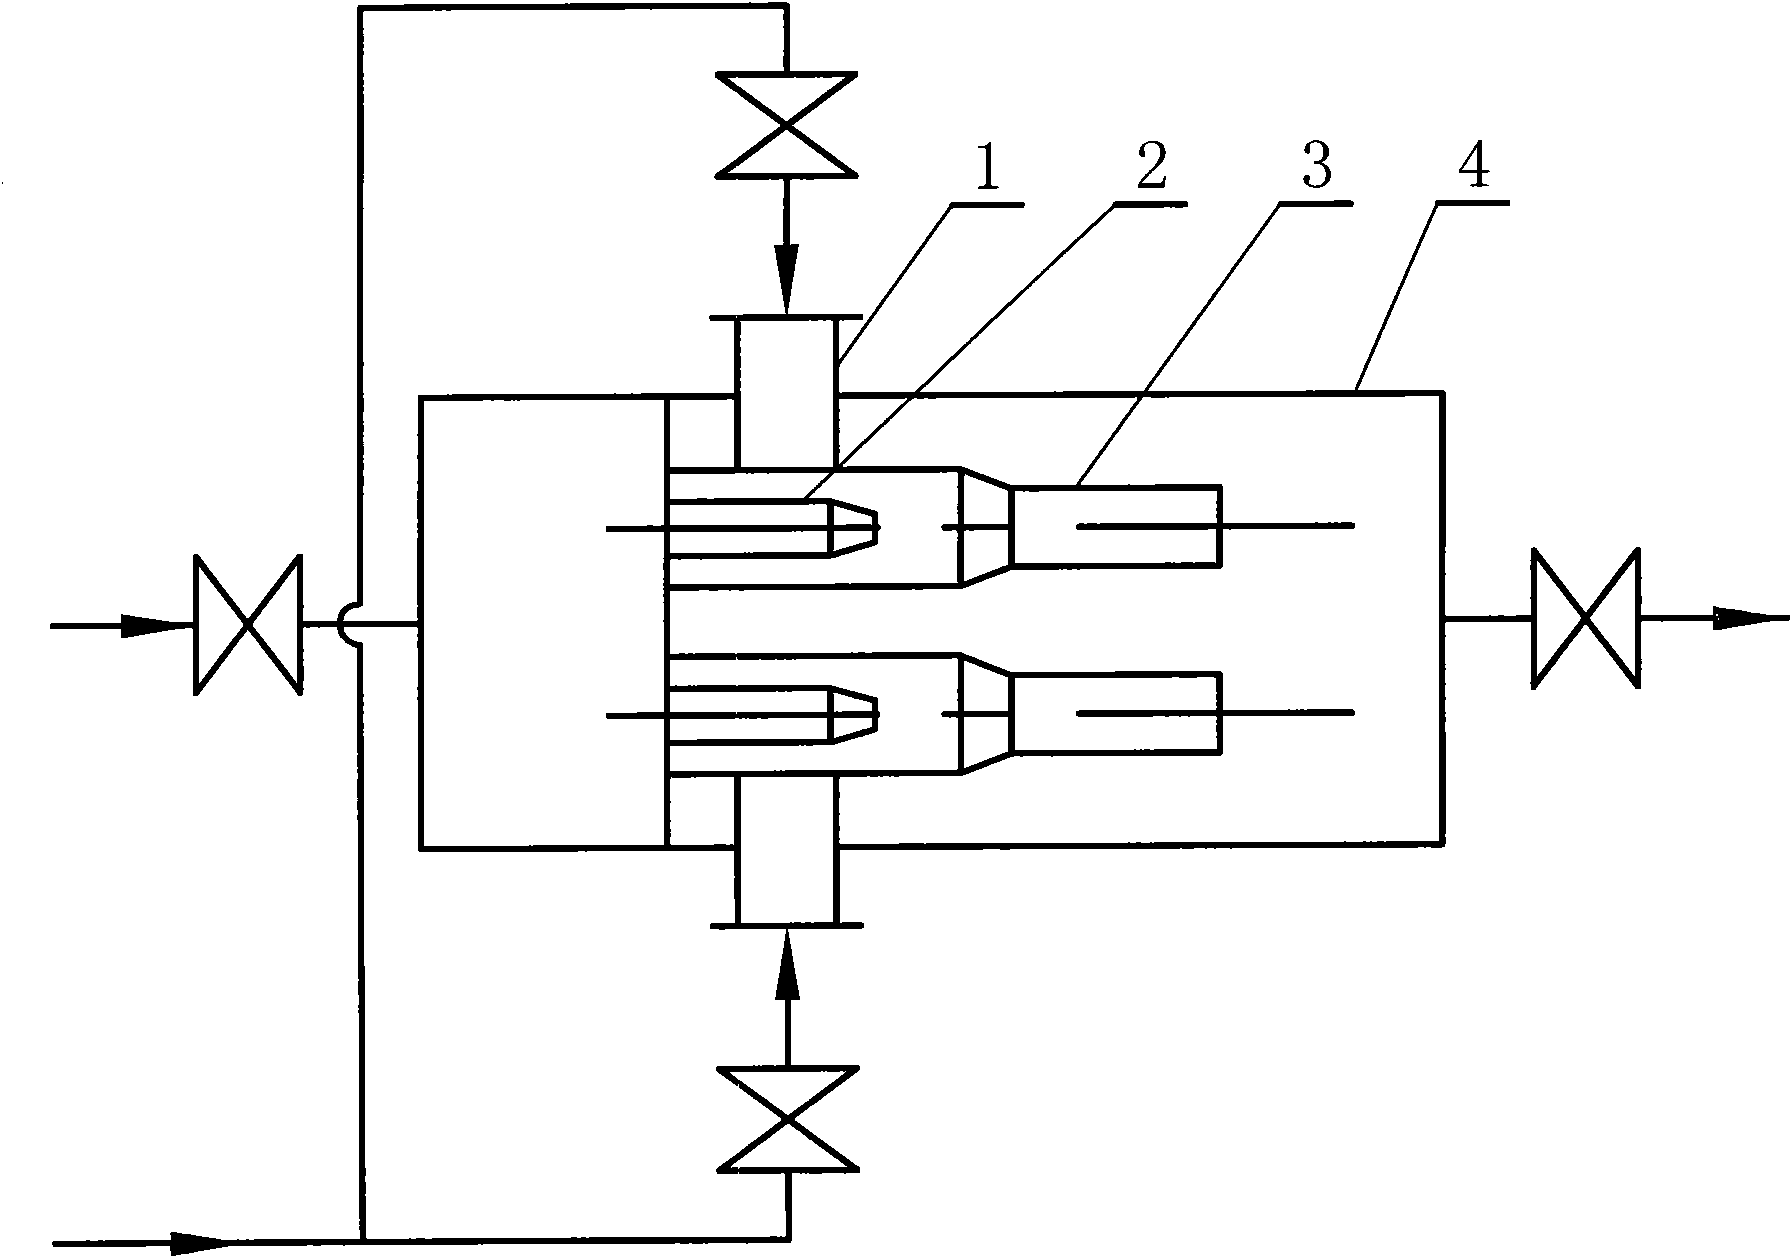 Multi-nozzle and multi-channel heater of steam-water two phase flow mixed type